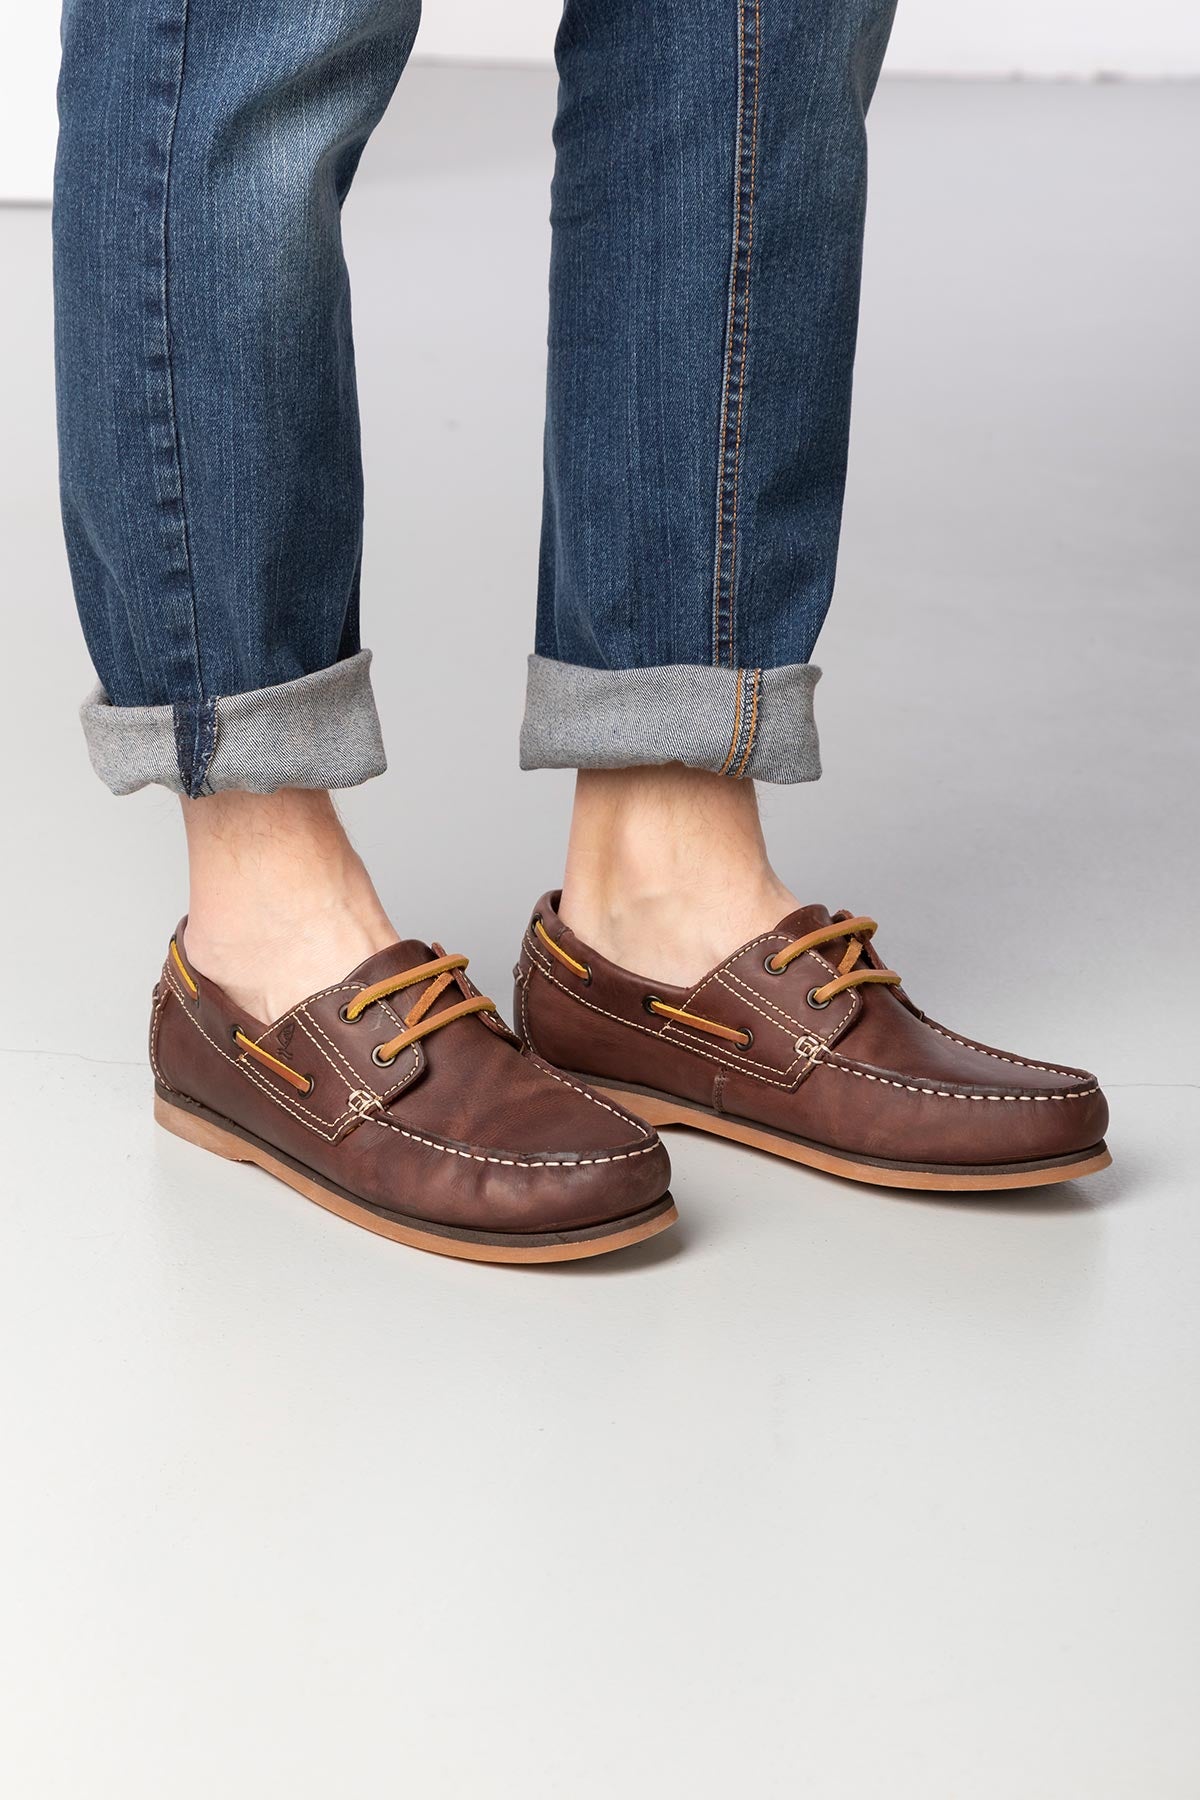 Mens Leather Deck Shoes UK | Rydale